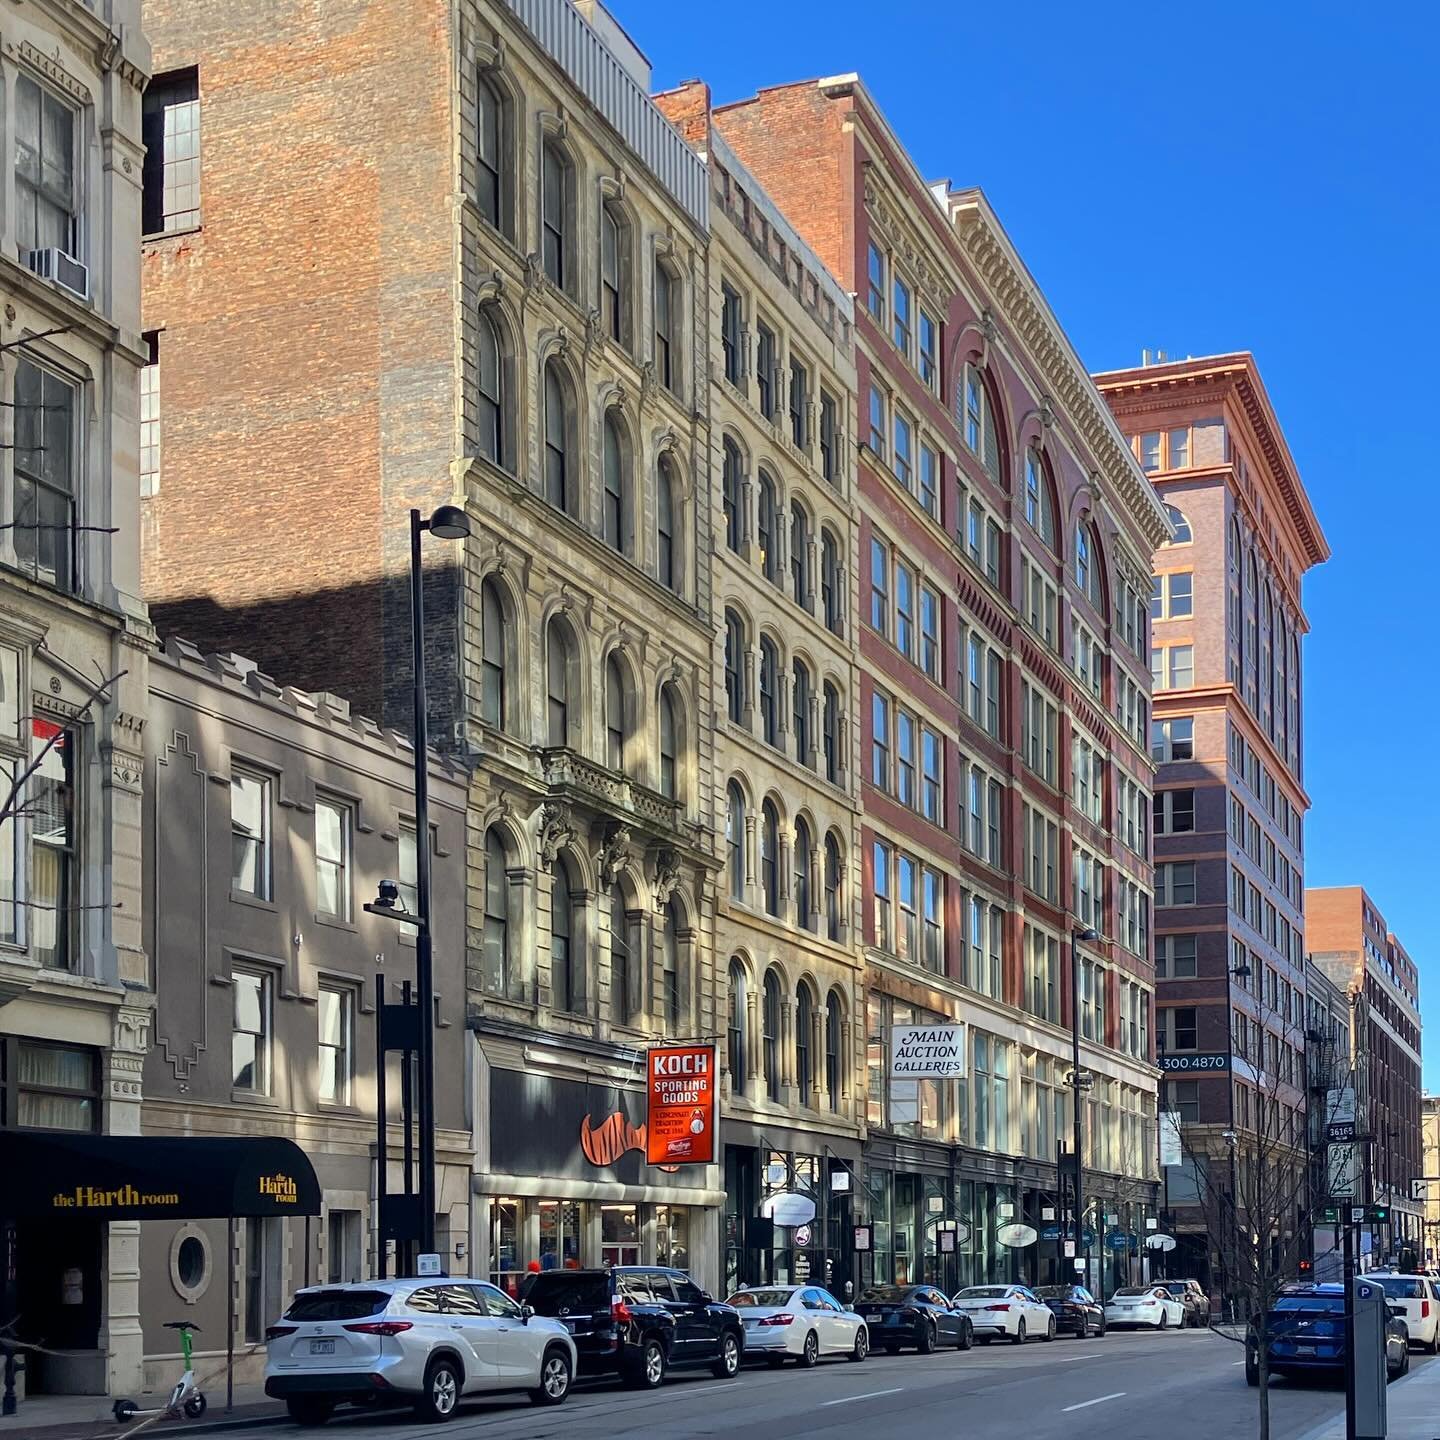 Today we&rsquo;re exploring Historic West Fourth St. in @downtowncincy! Once nicknamed the &ldquo;Broadway of Cincinnati,&rdquo; this is a premier shopping and financial center, as well as a desirable residential area.

The West Fourth Street Histori